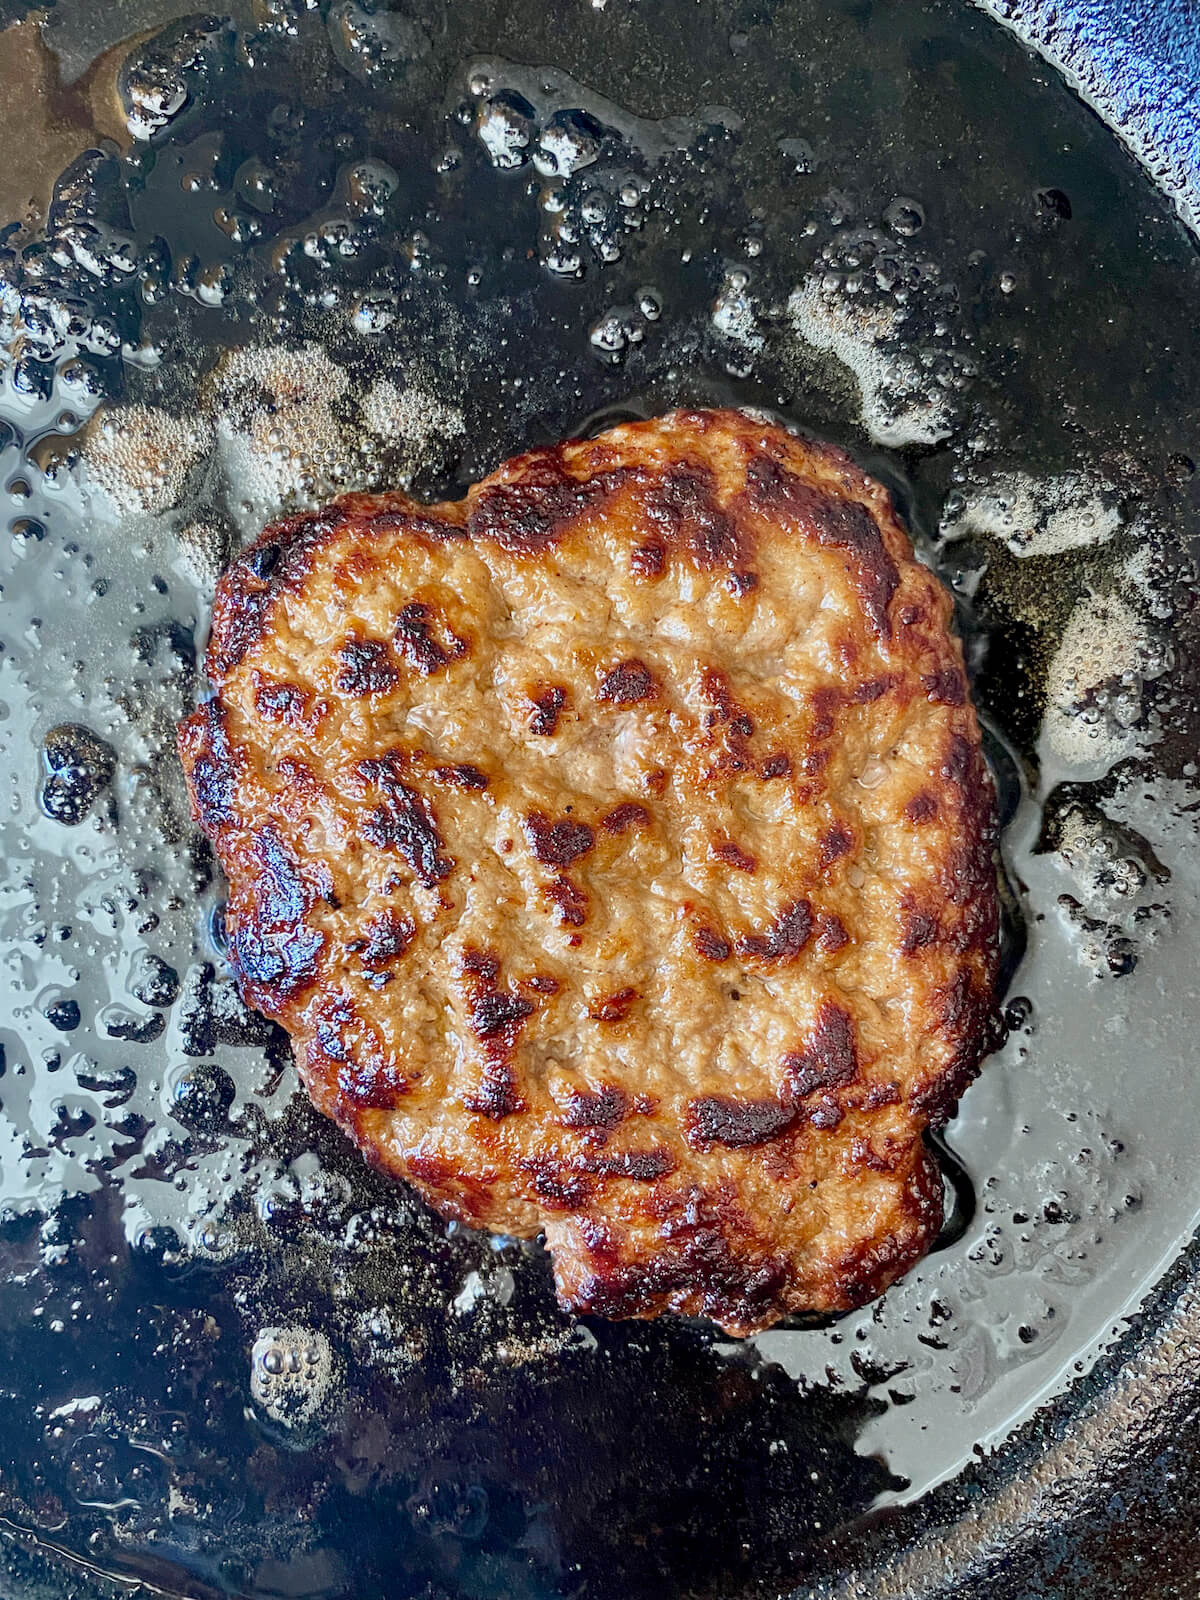 A seared turkey smash burger cooking in a cast iron skillet.